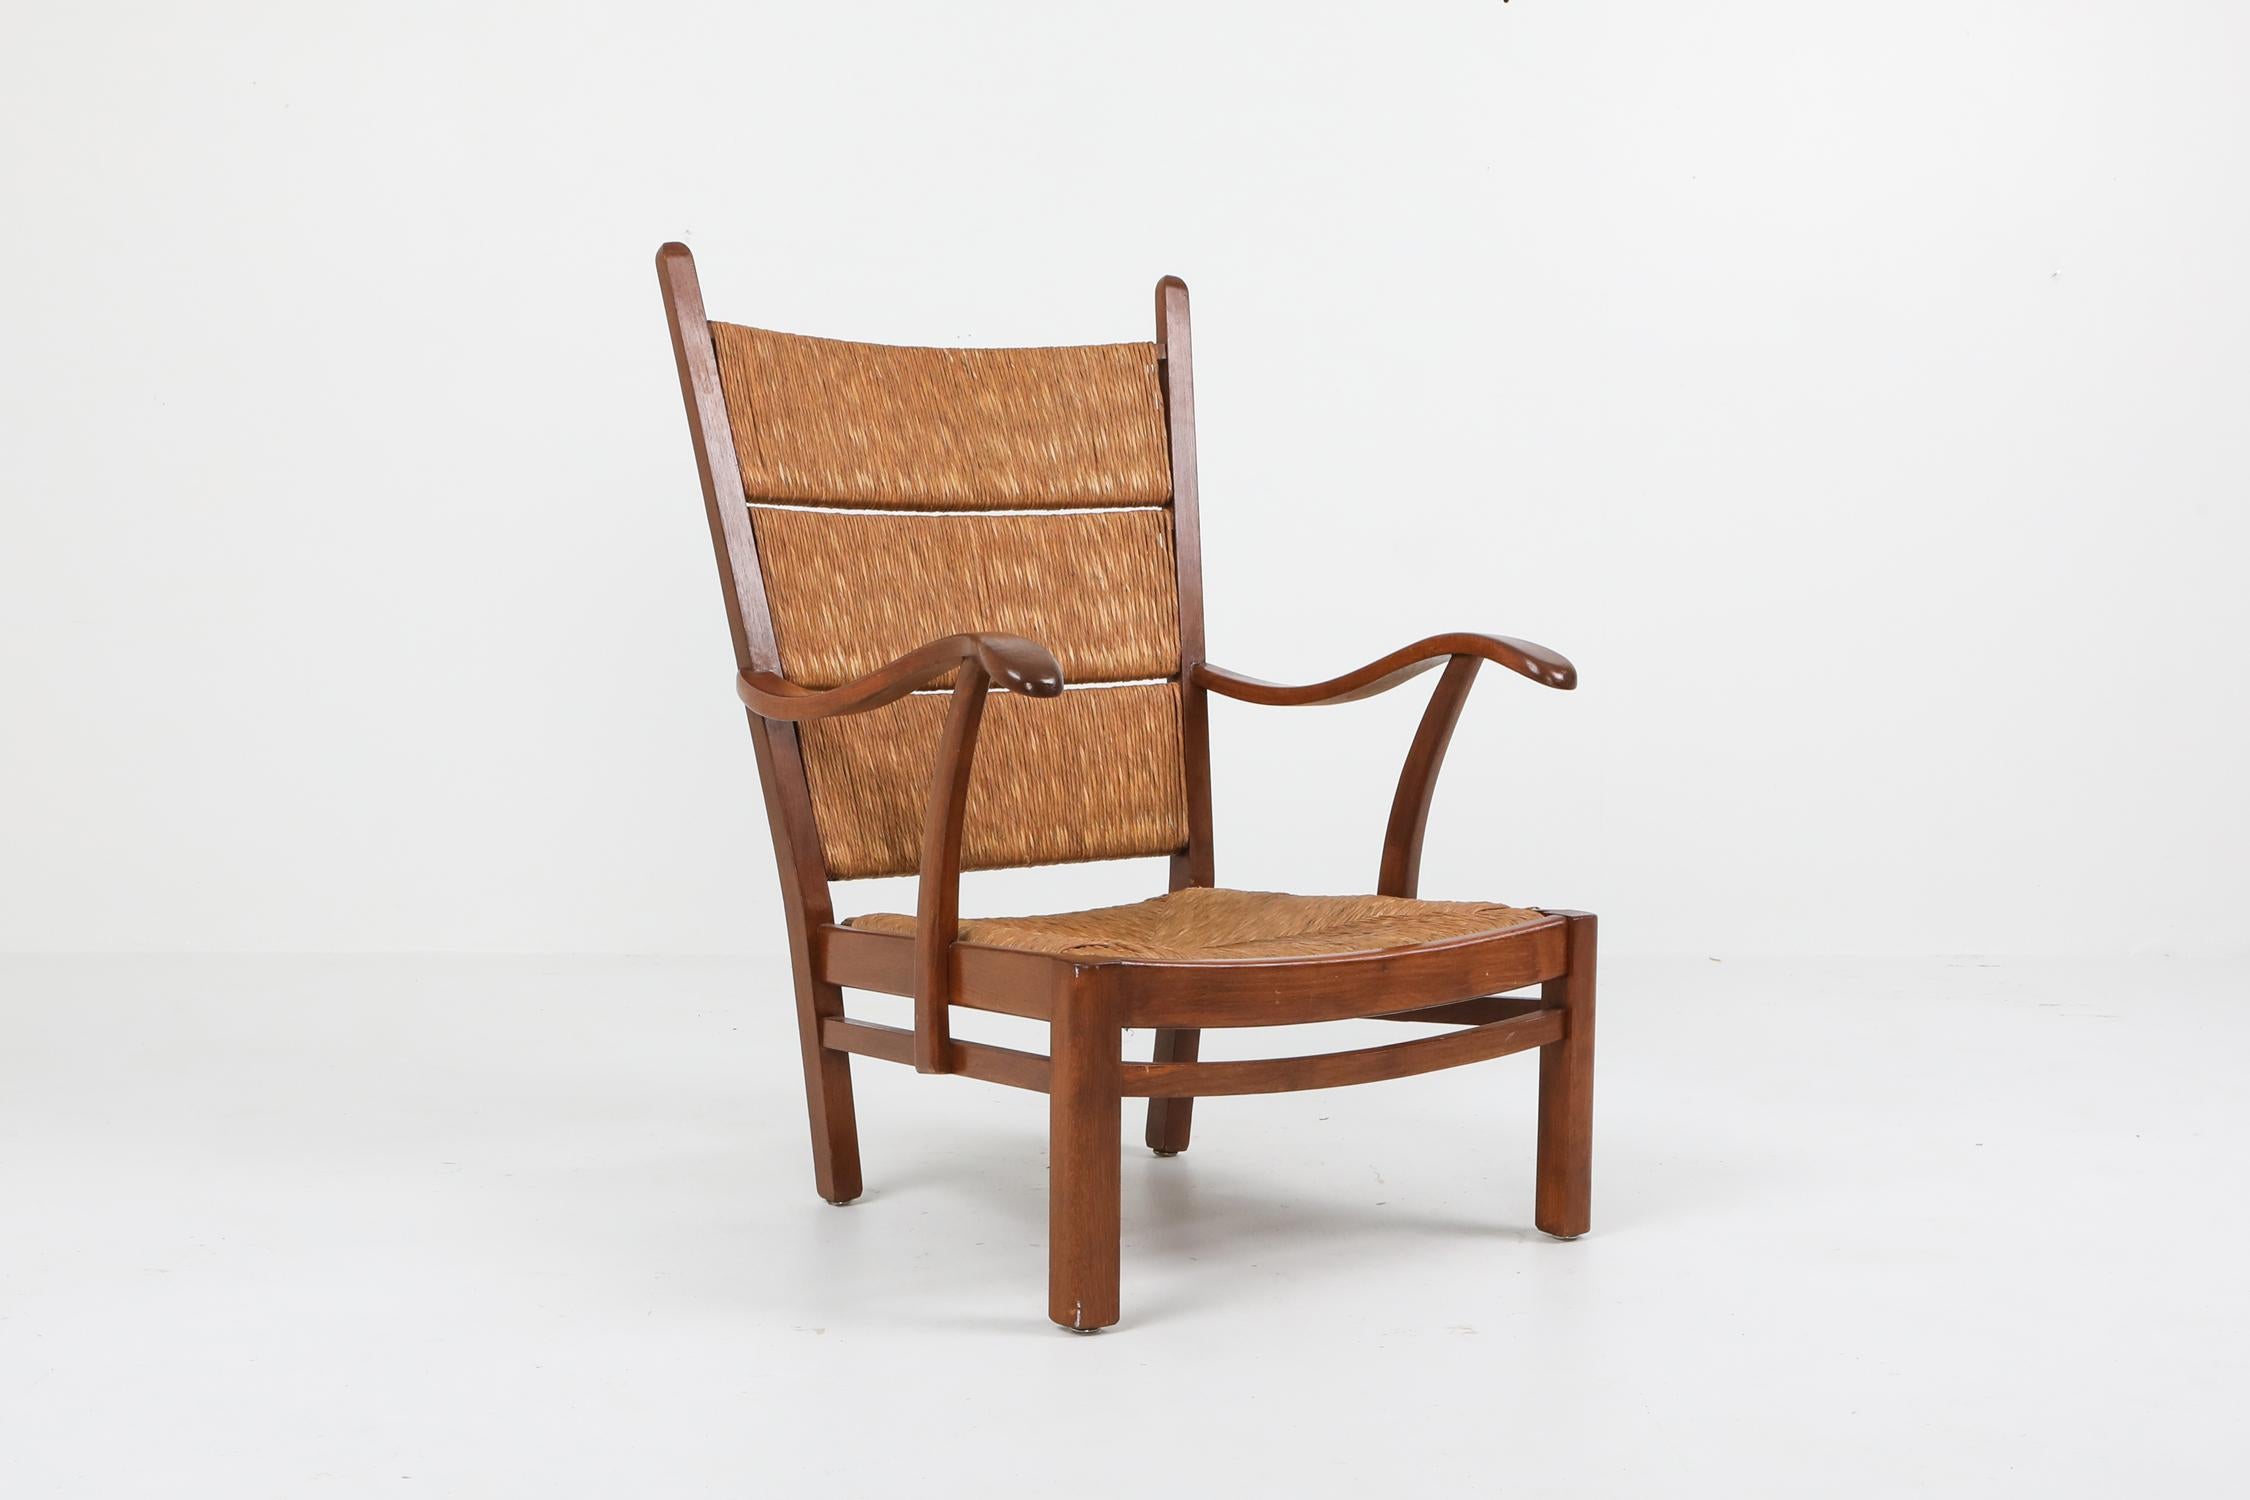 Mid-century modern Bas Van Pelt (attributed) high back armchairs in oak and straw, the Netherlands, 1940s. The armchair is made in solid oak and straw, attributed to Dutch designer Bas Van Pelt. The construction of this rare early 1940s design is